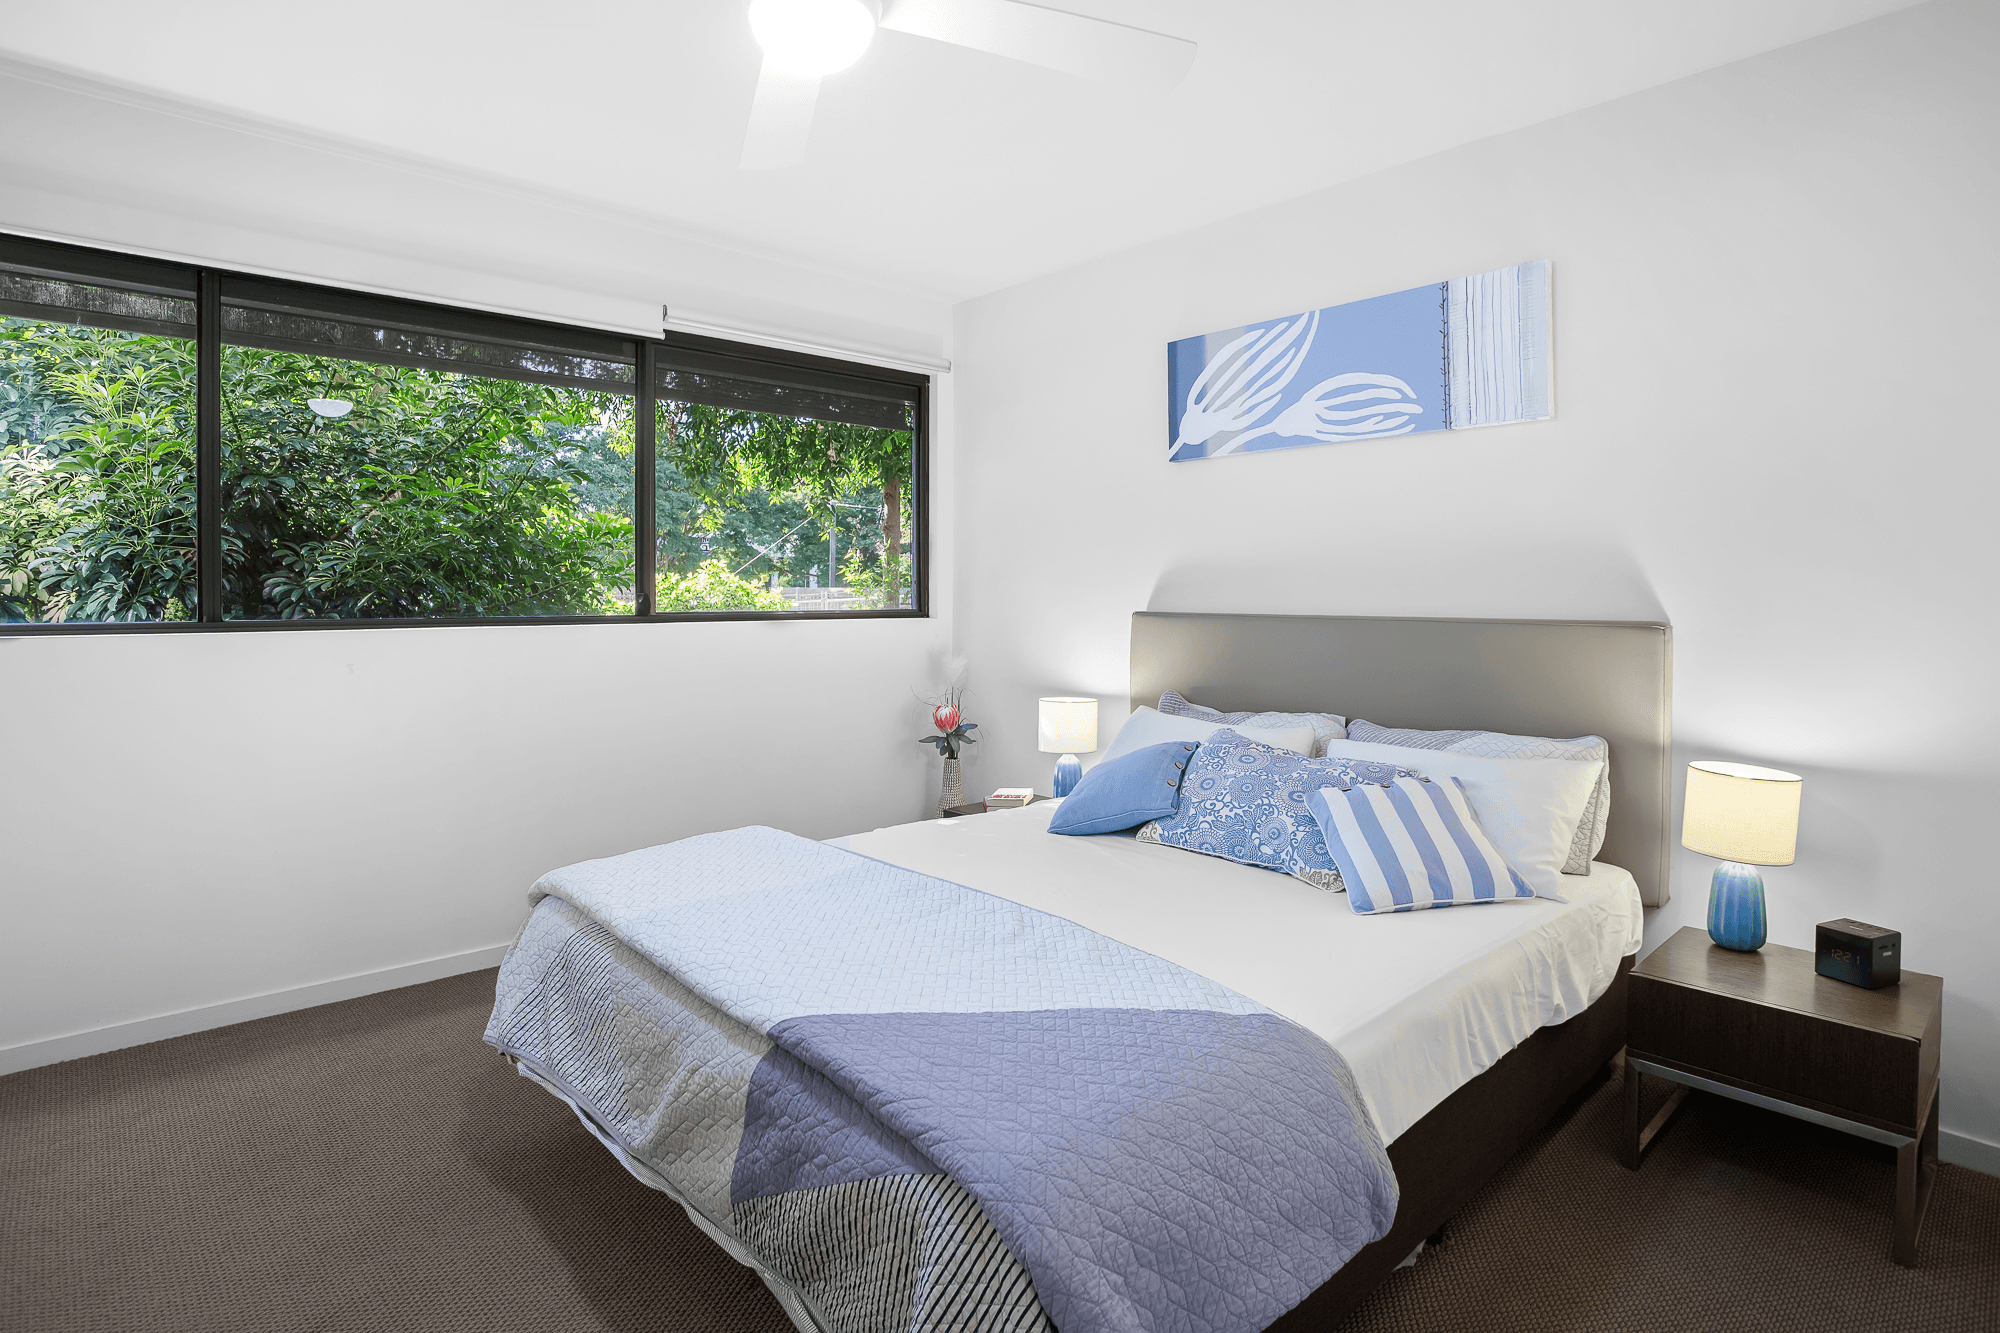 104/8 Musgrave St, West End, QLD 4101